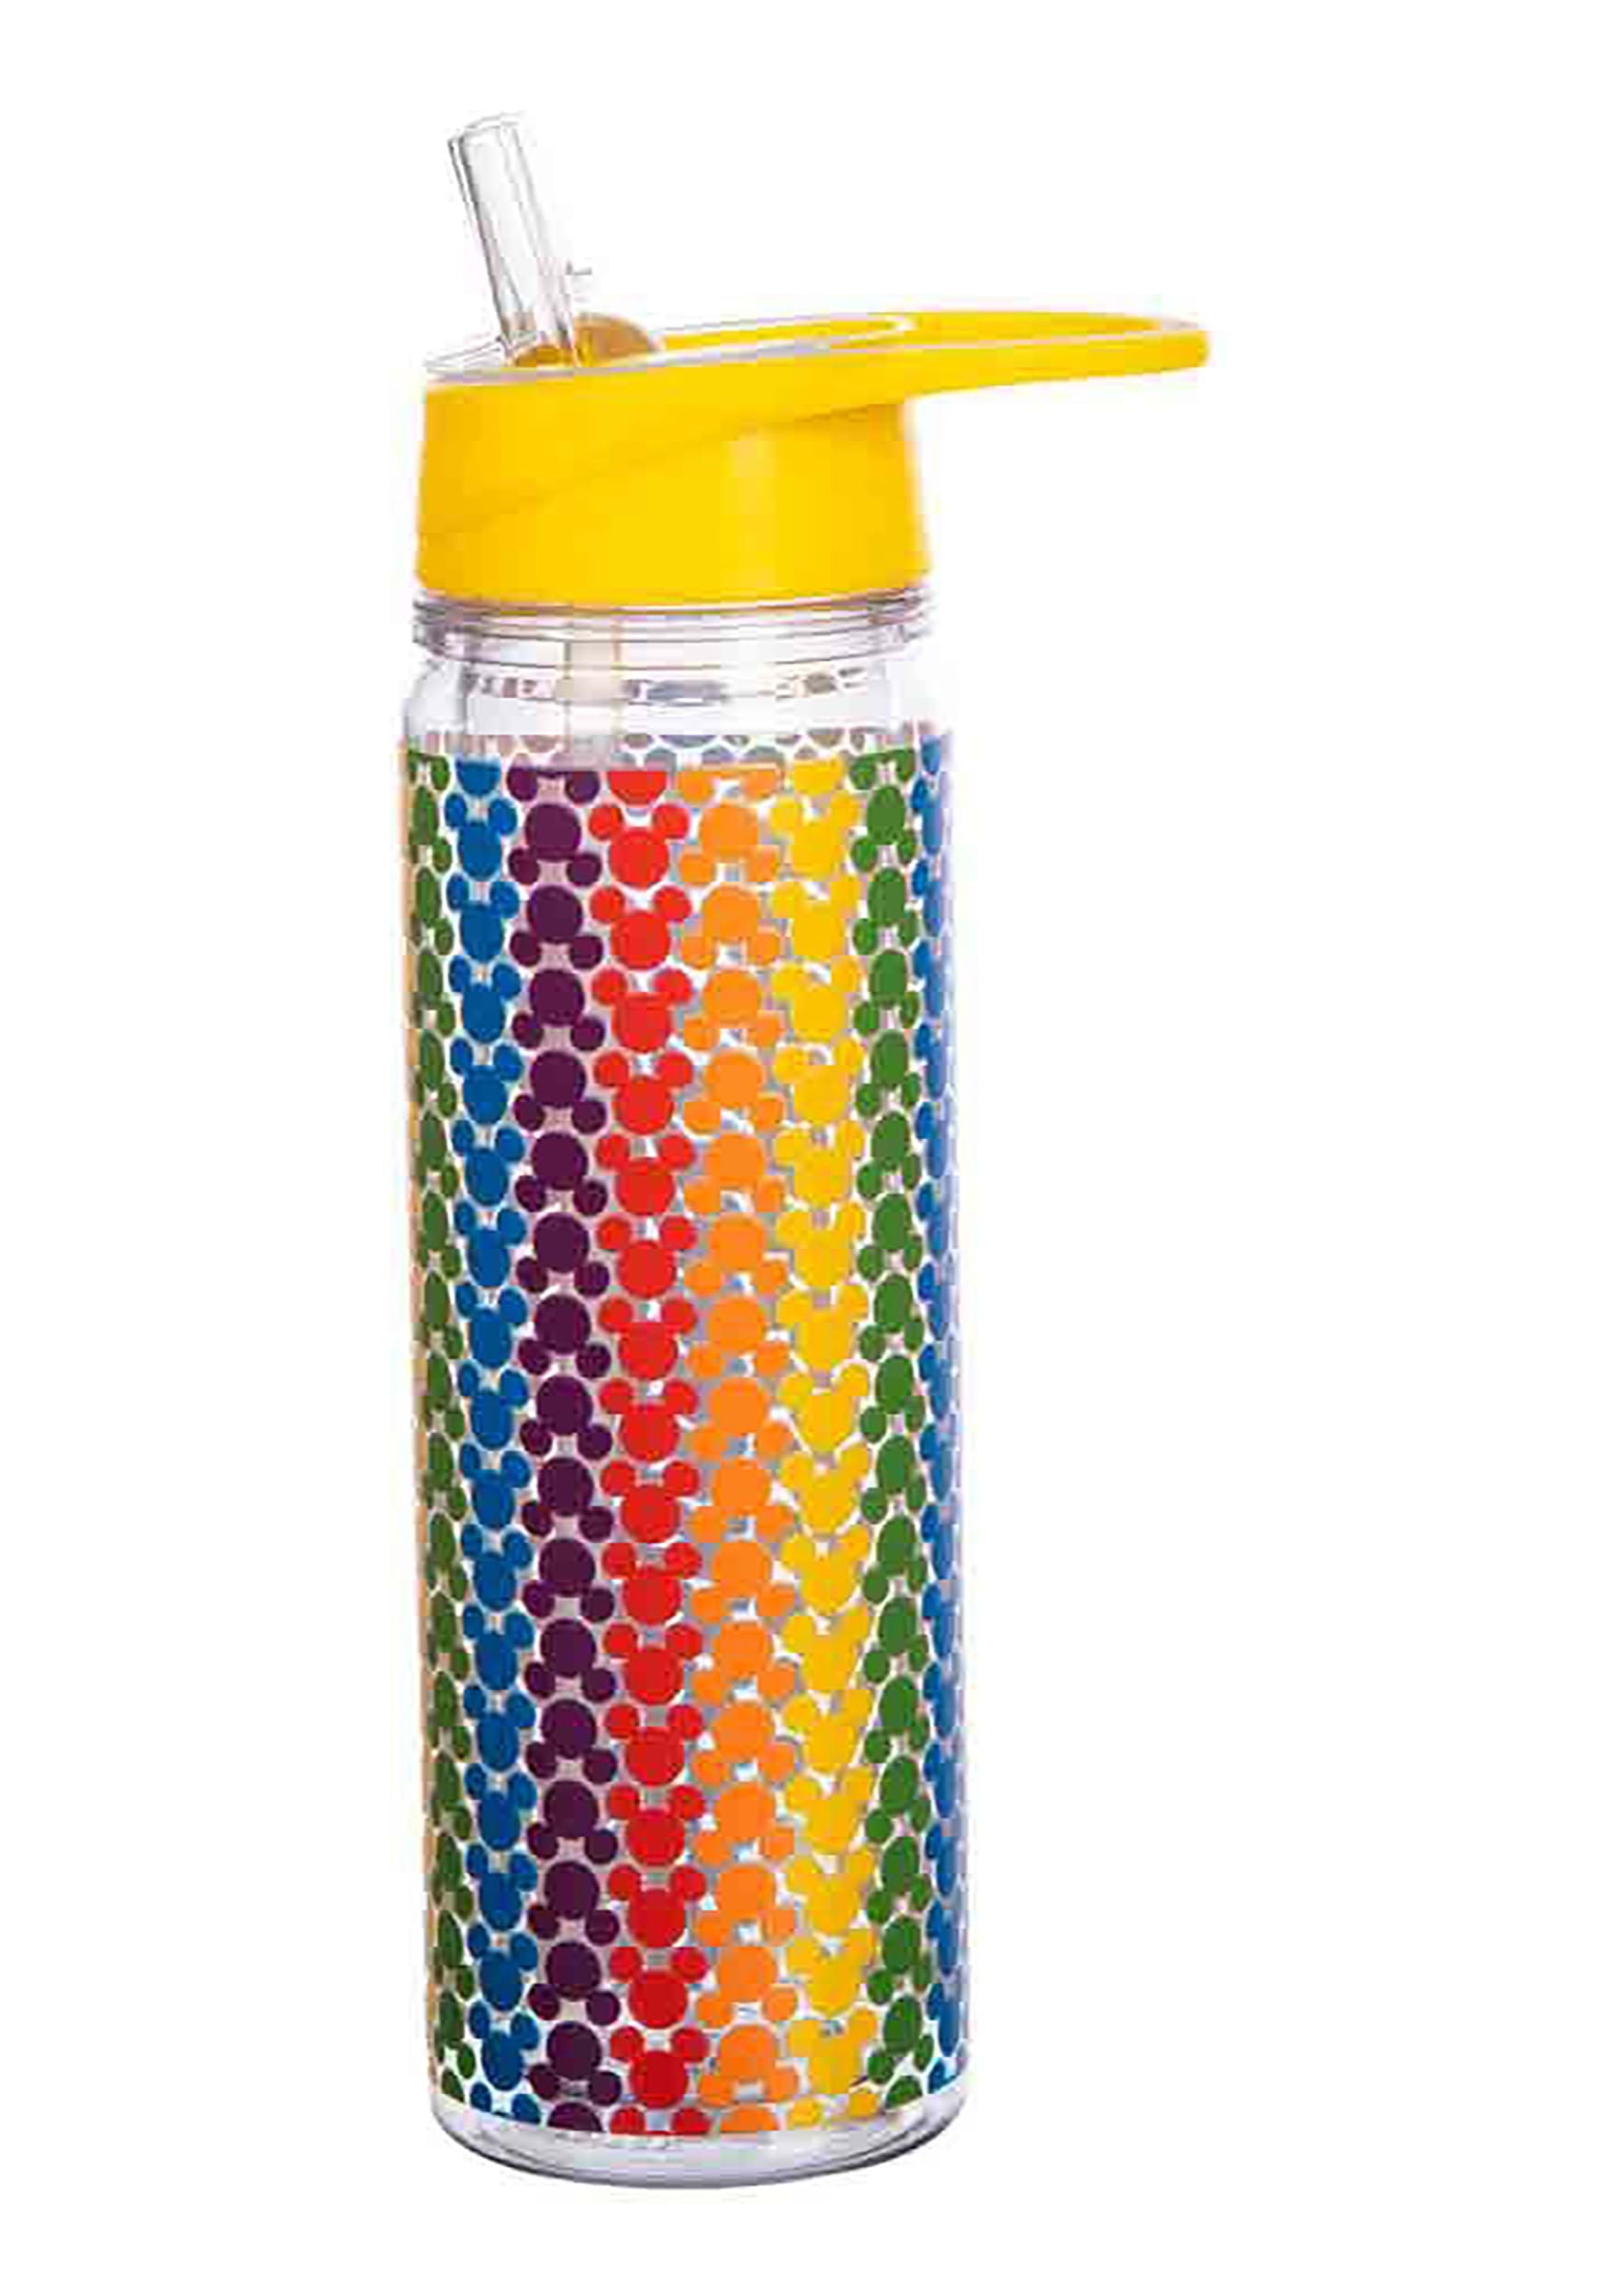 https://images.fun.com/products/79116/2-1-203805/disney-mickey-mouse-pride-rainbow-double-wall-water-bottle-2.jpg